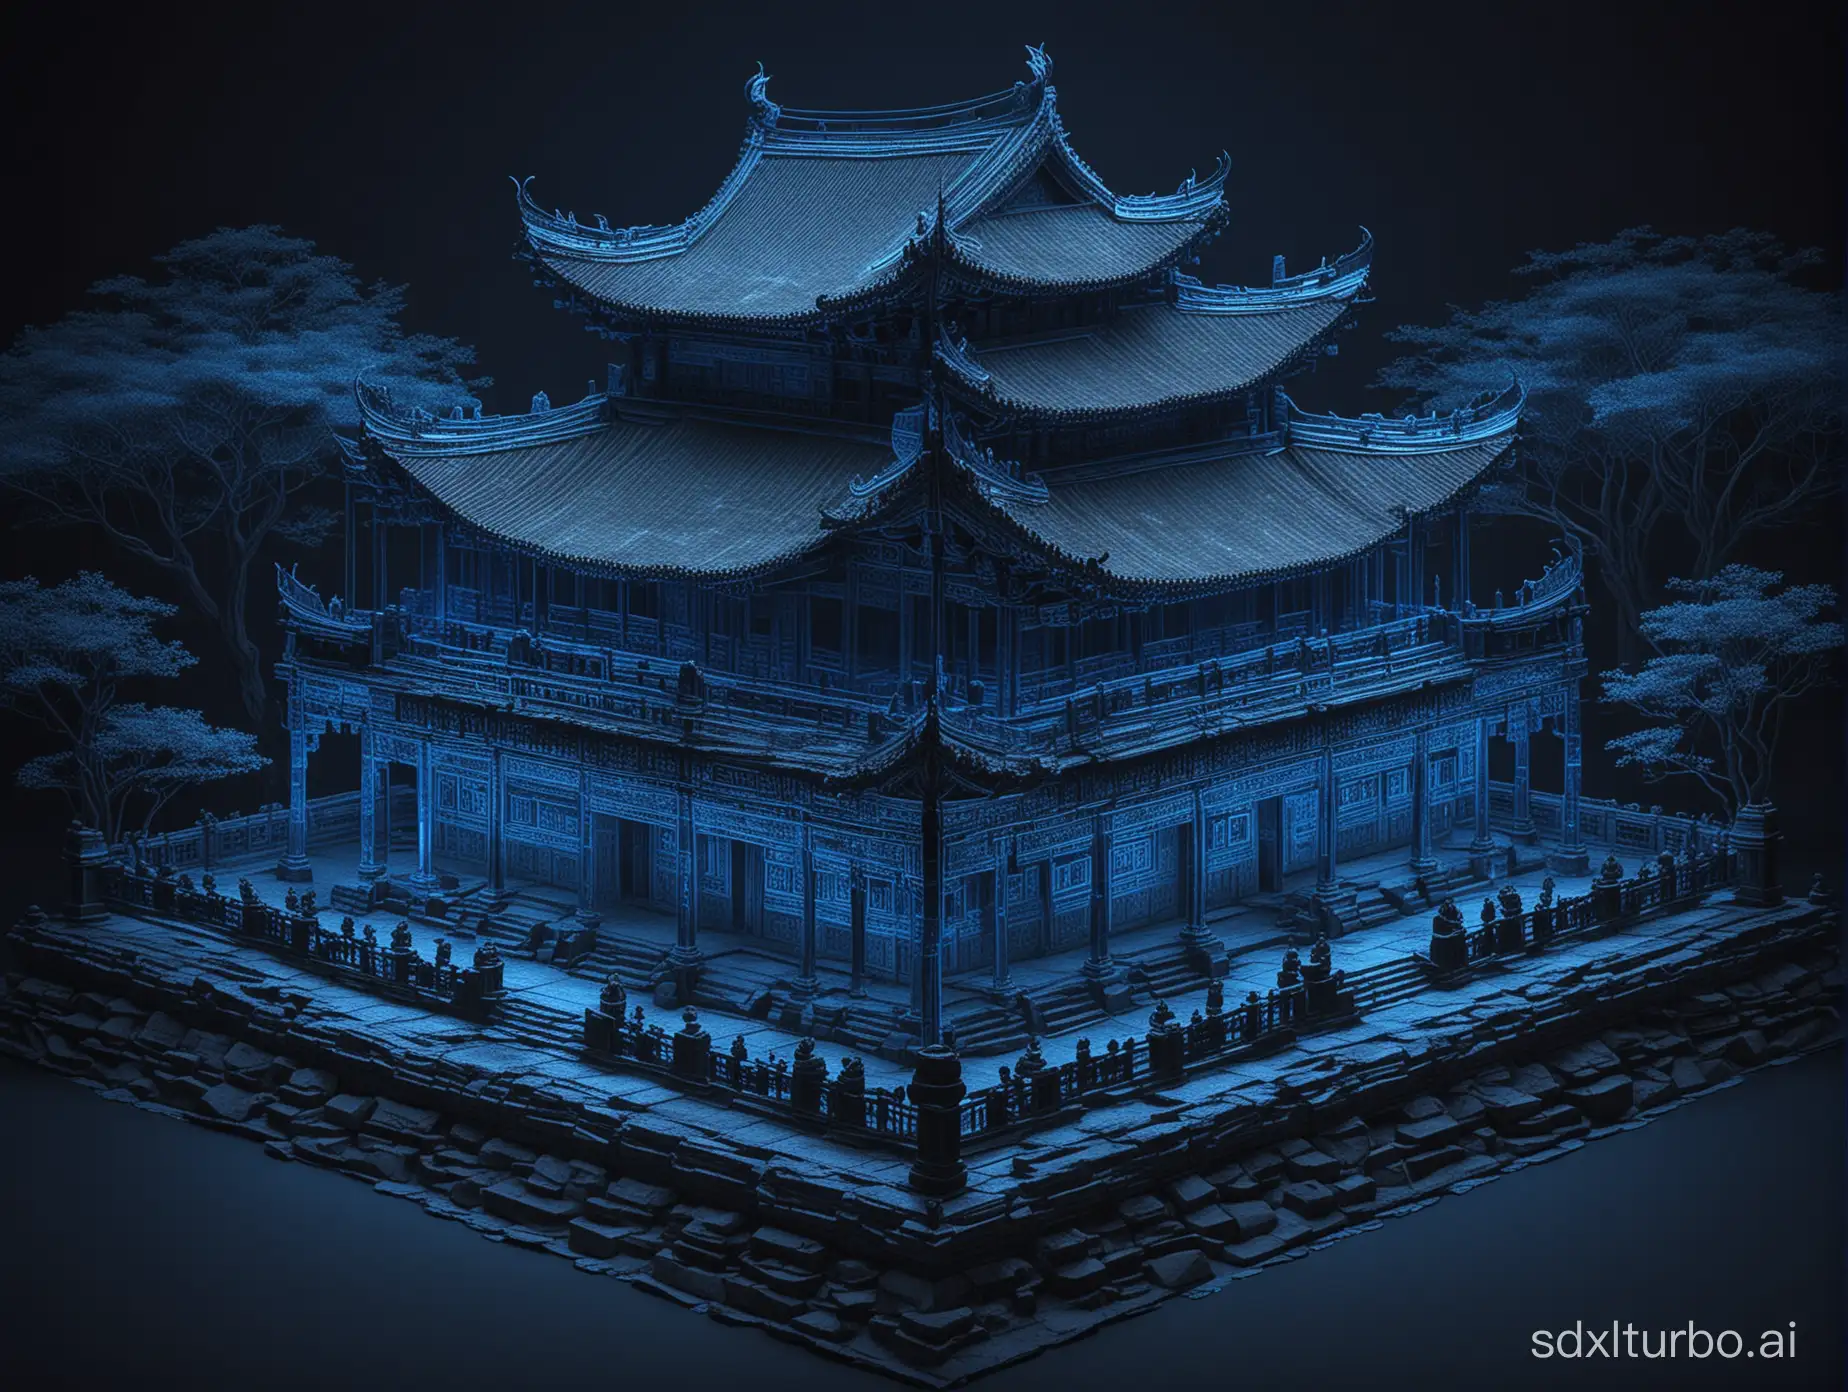 This is a wireframe hologram of the Temple of Literature, with glowing blue lines forming an intricate pattern around its iconic structure against an isolated dark background. The design showcases detailed architectural details and features, creating a visually stunning representation of traditional Chinese architecture.